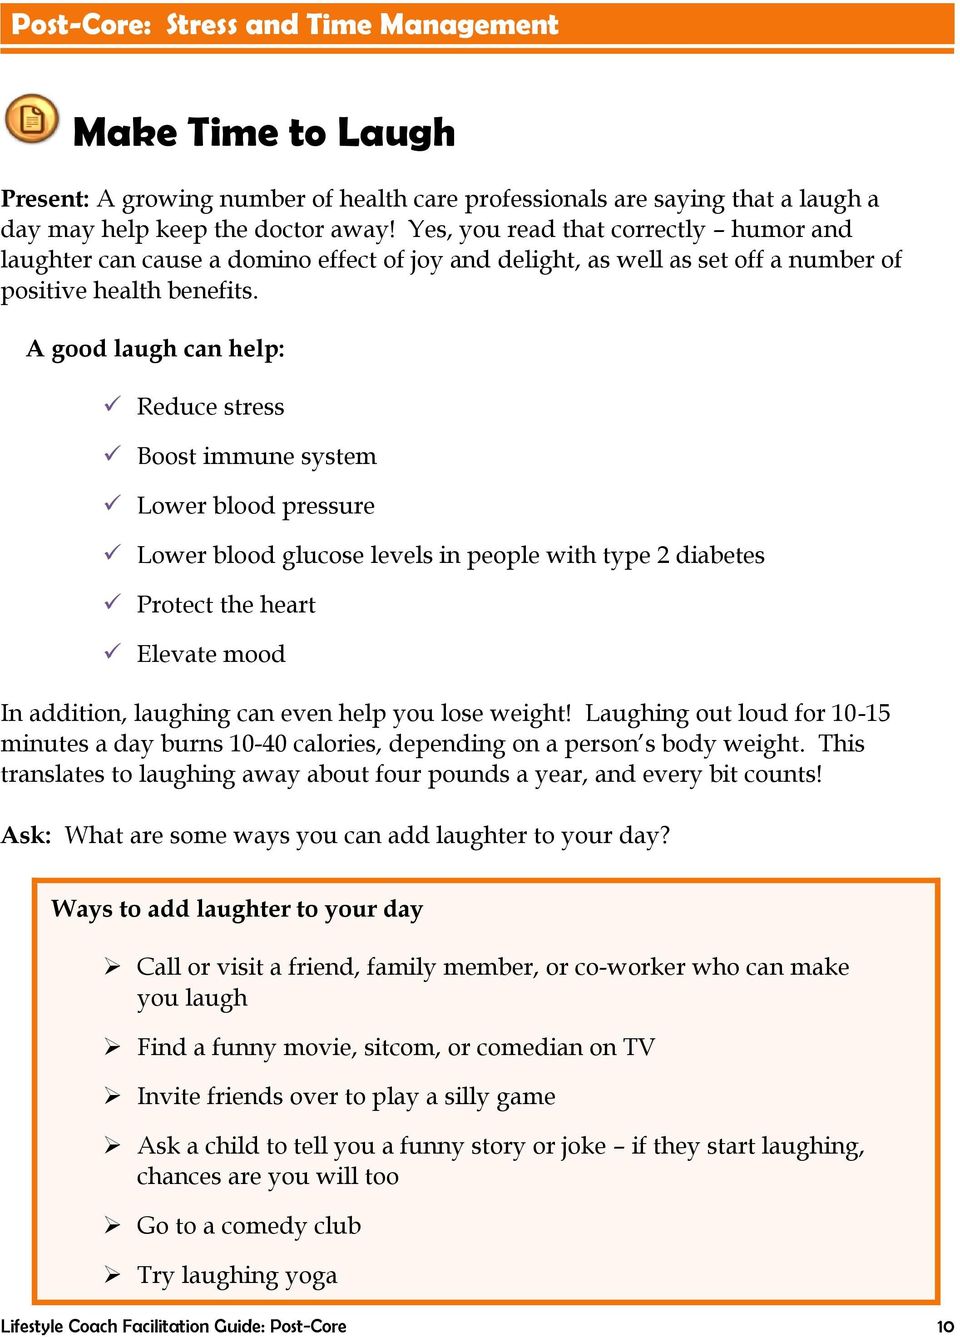 A good laugh can help: Reduce stress Boost immune system Lower blood pressure Lower blood glucose levels in people with type 2 diabetes Protect the heart Elevate mood In addition, laughing can even